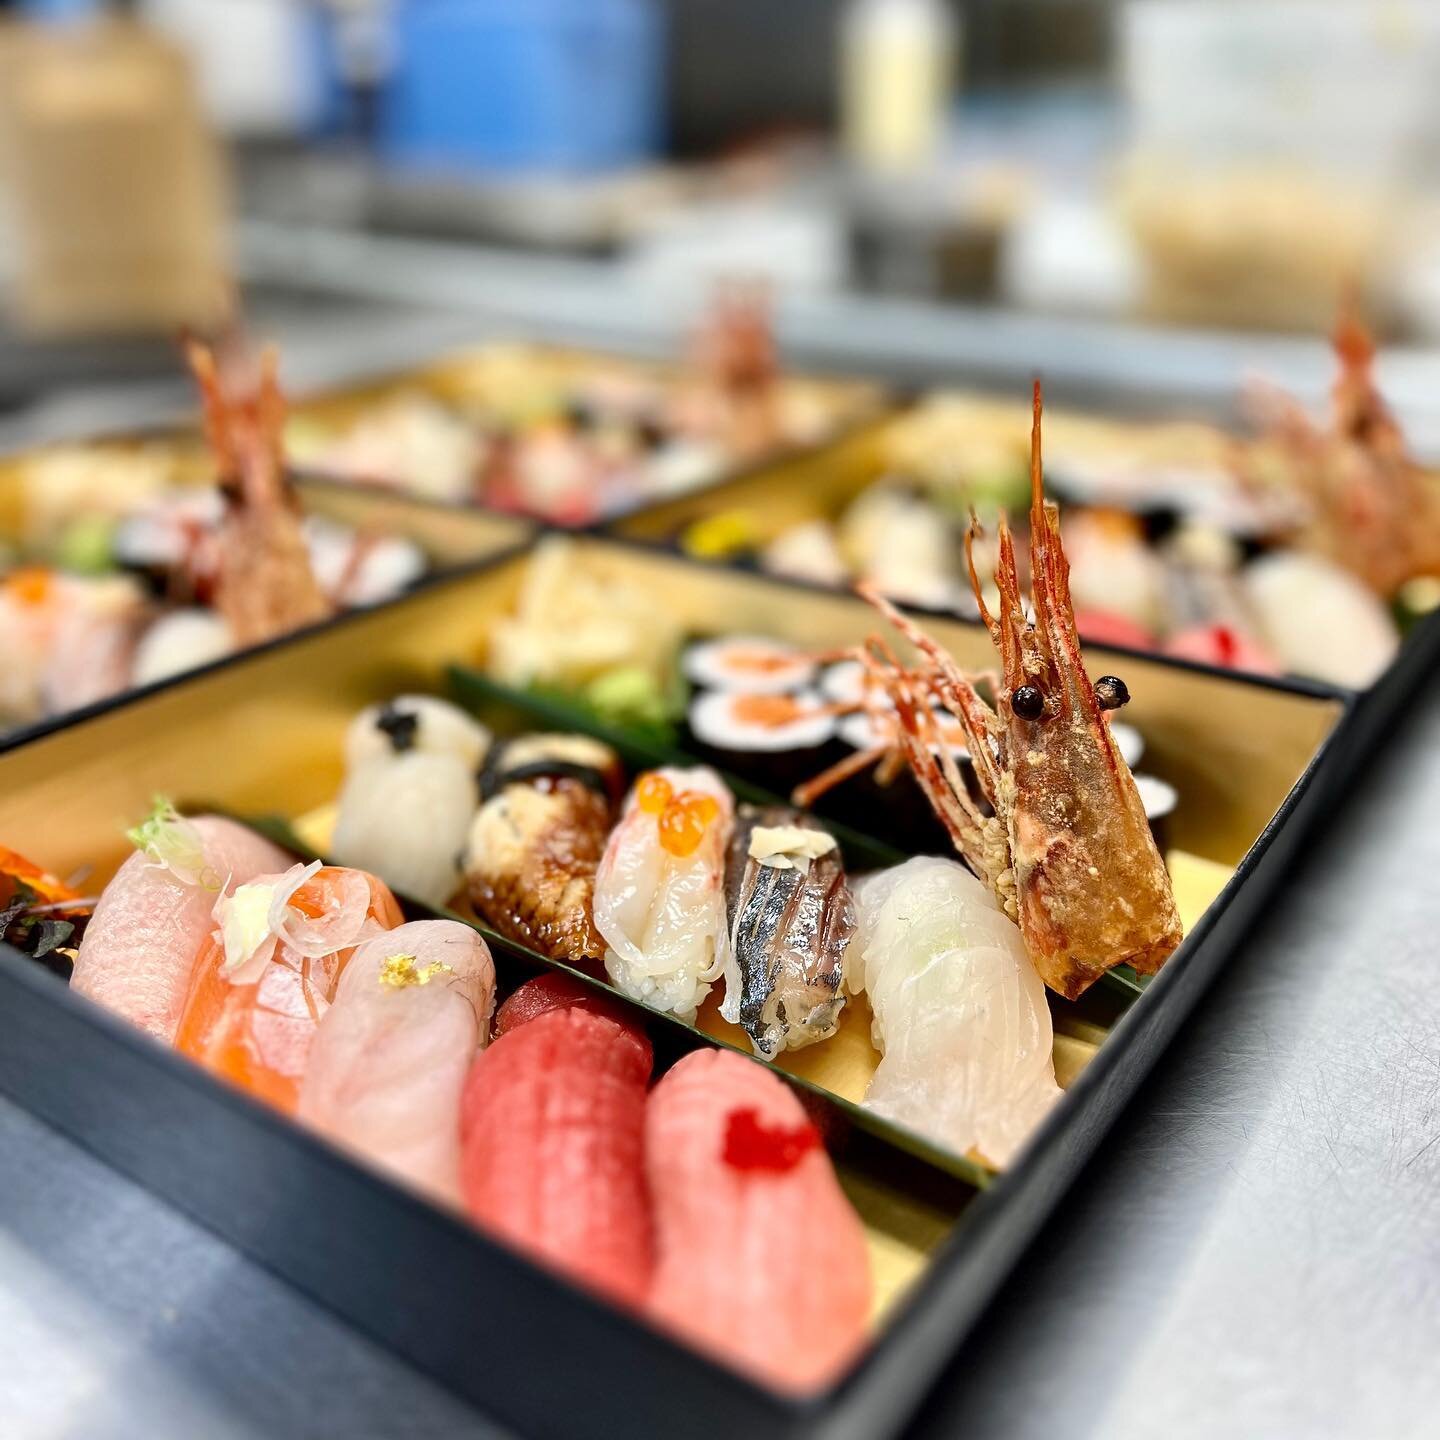 Our Premium Omakase is the best way to enjoy top-quality sushi!! #omakase #sushi #bento #private #corporate #party #assorted #topquality #nigiri🍣 #sushilovers #sushichef #cheflife🔪 #foodie #foodstagram